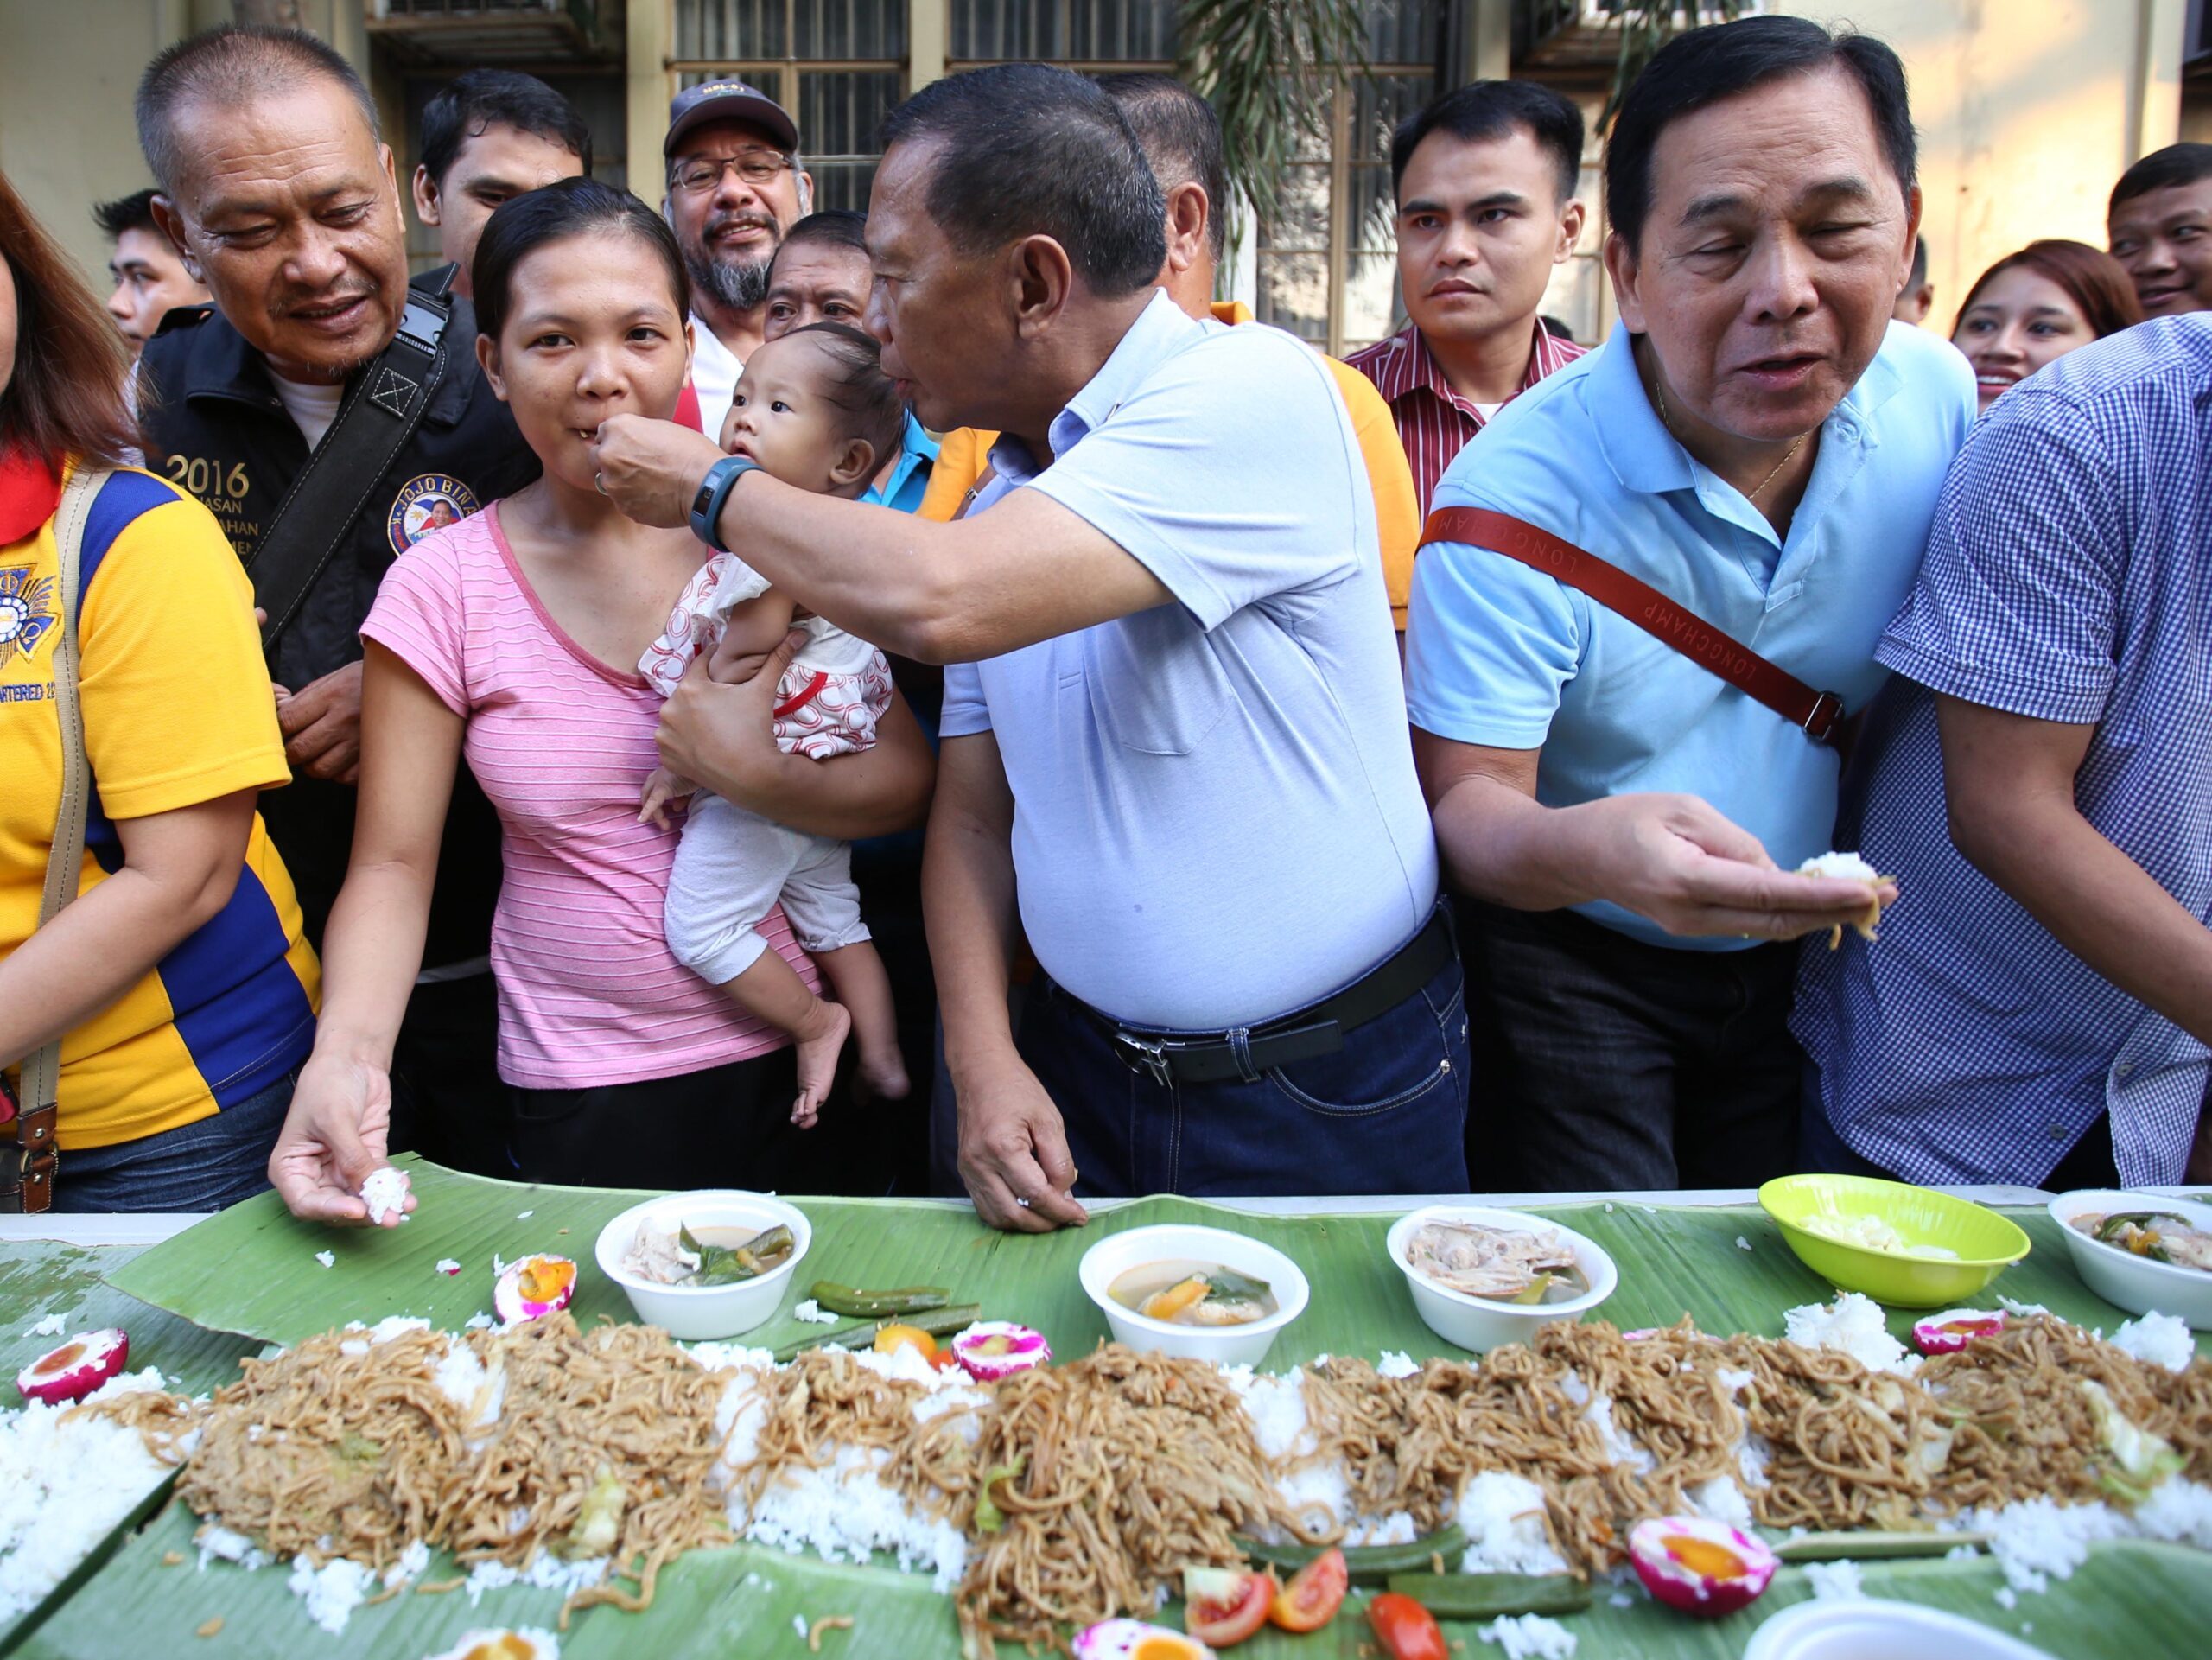 Binay: I will bear ‘suffering’ for poor